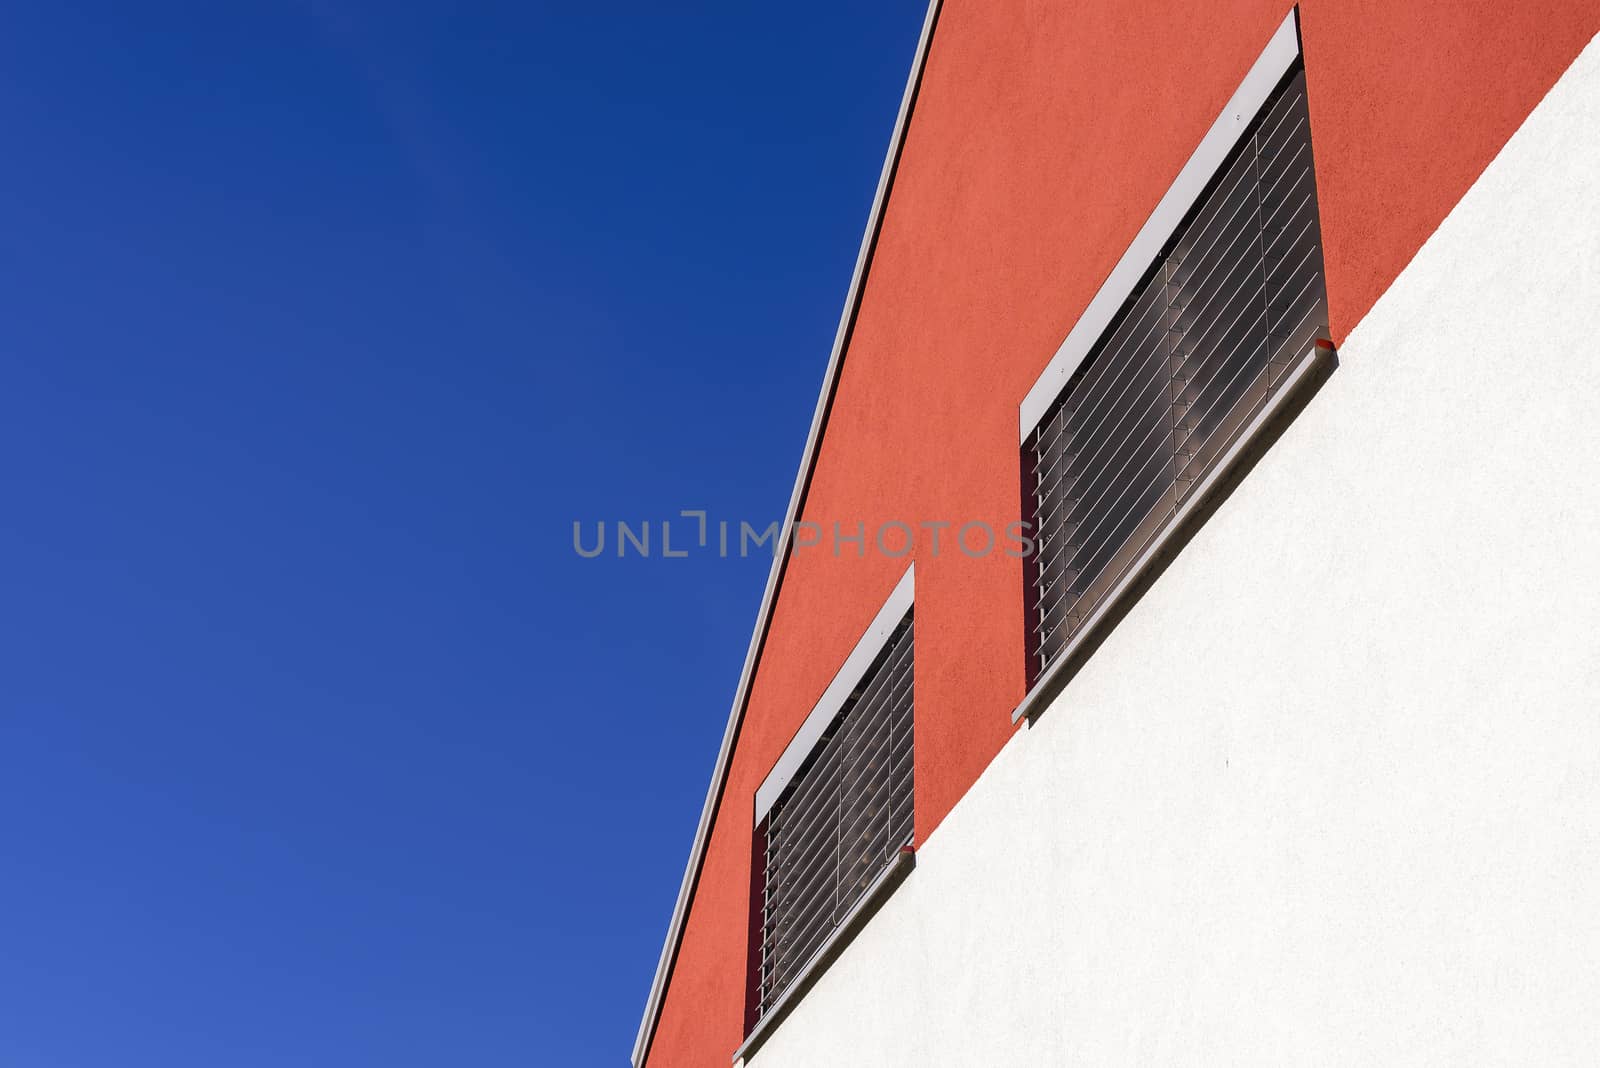 Colourful graphic architectural design; orange and white facade with silver alluminium venetian blinds and blue sky as background